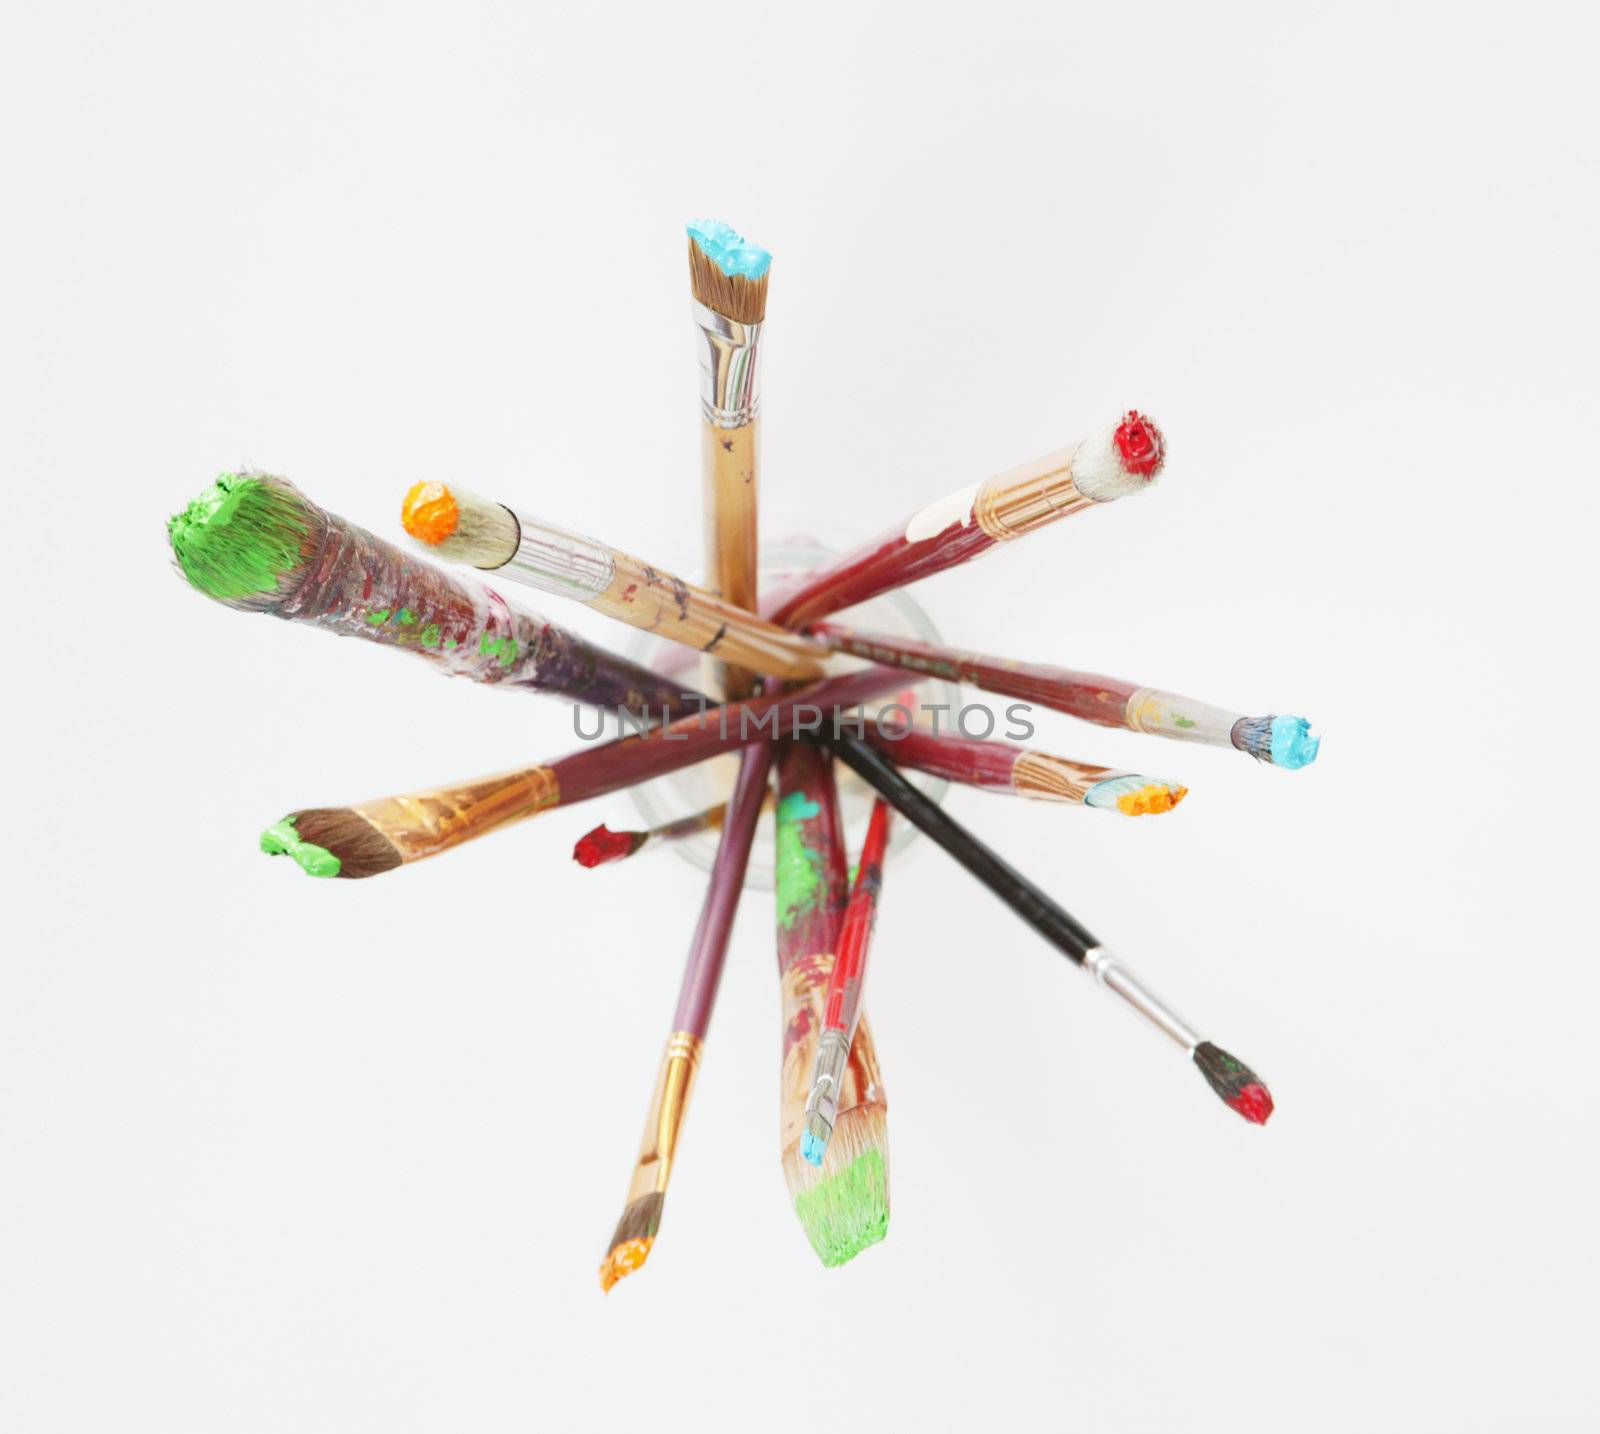 Paintbrushes in a glass jar against a white background, shot from above.